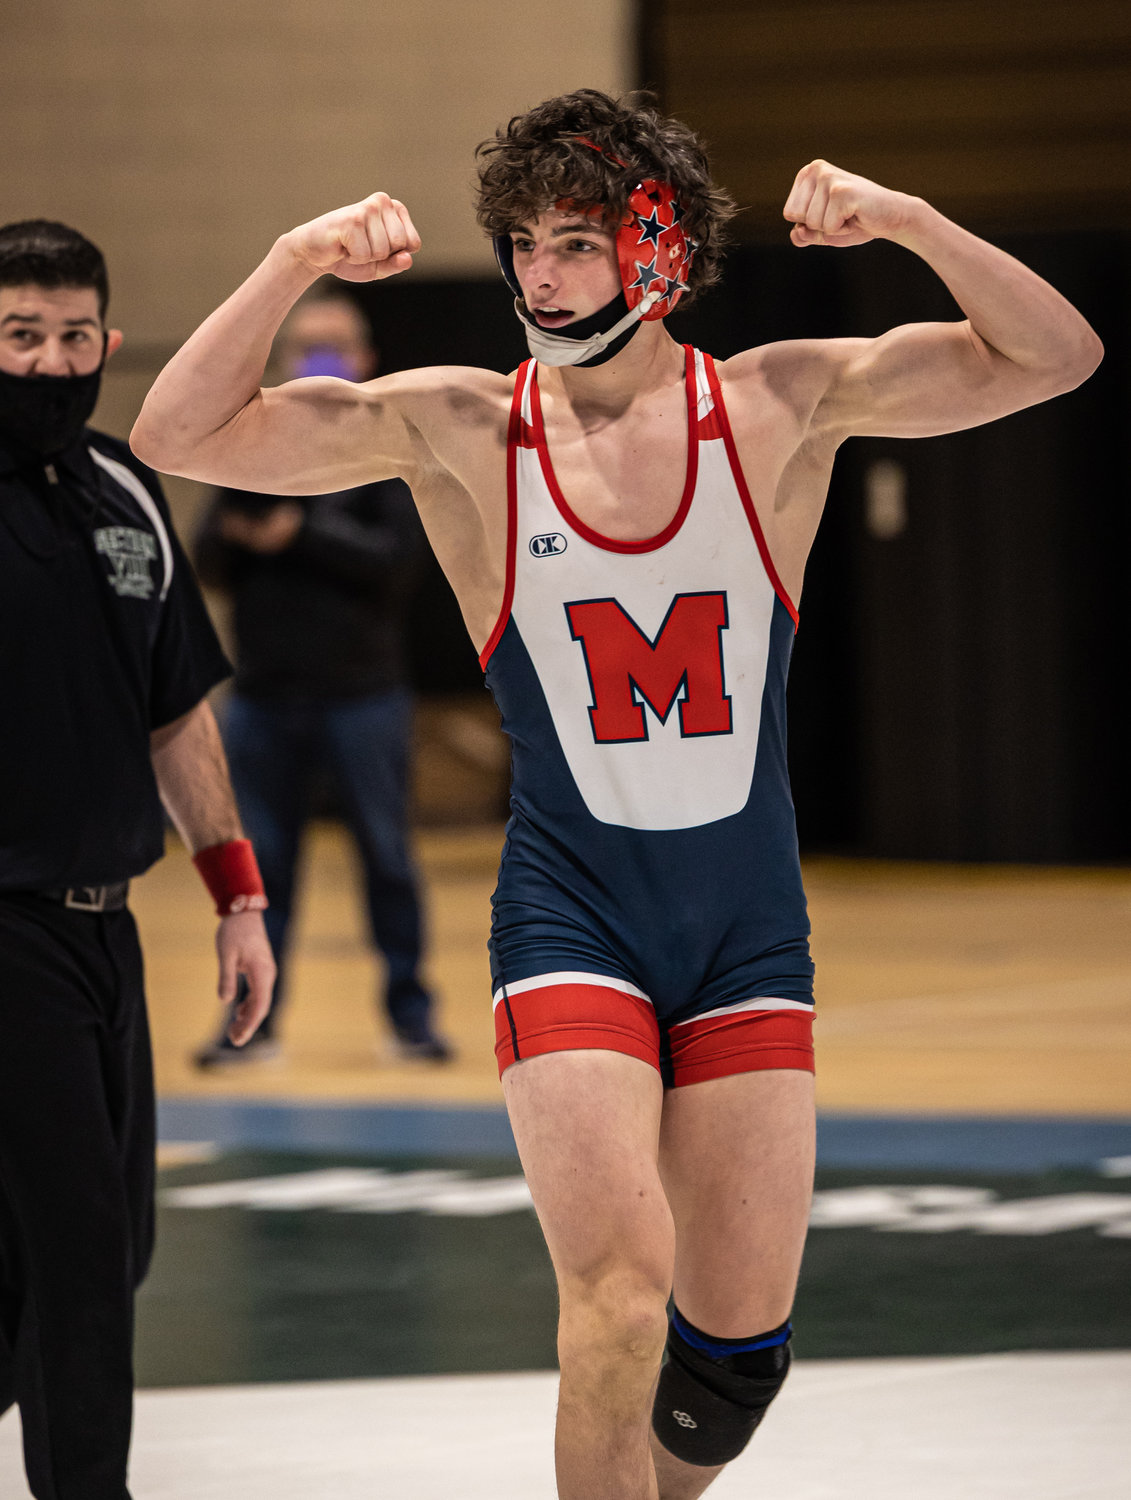 MacArthur senior Killian Foy captured the Nassau County 138-pound title Feb. 13 and went on to earn All-State honors last weekend.